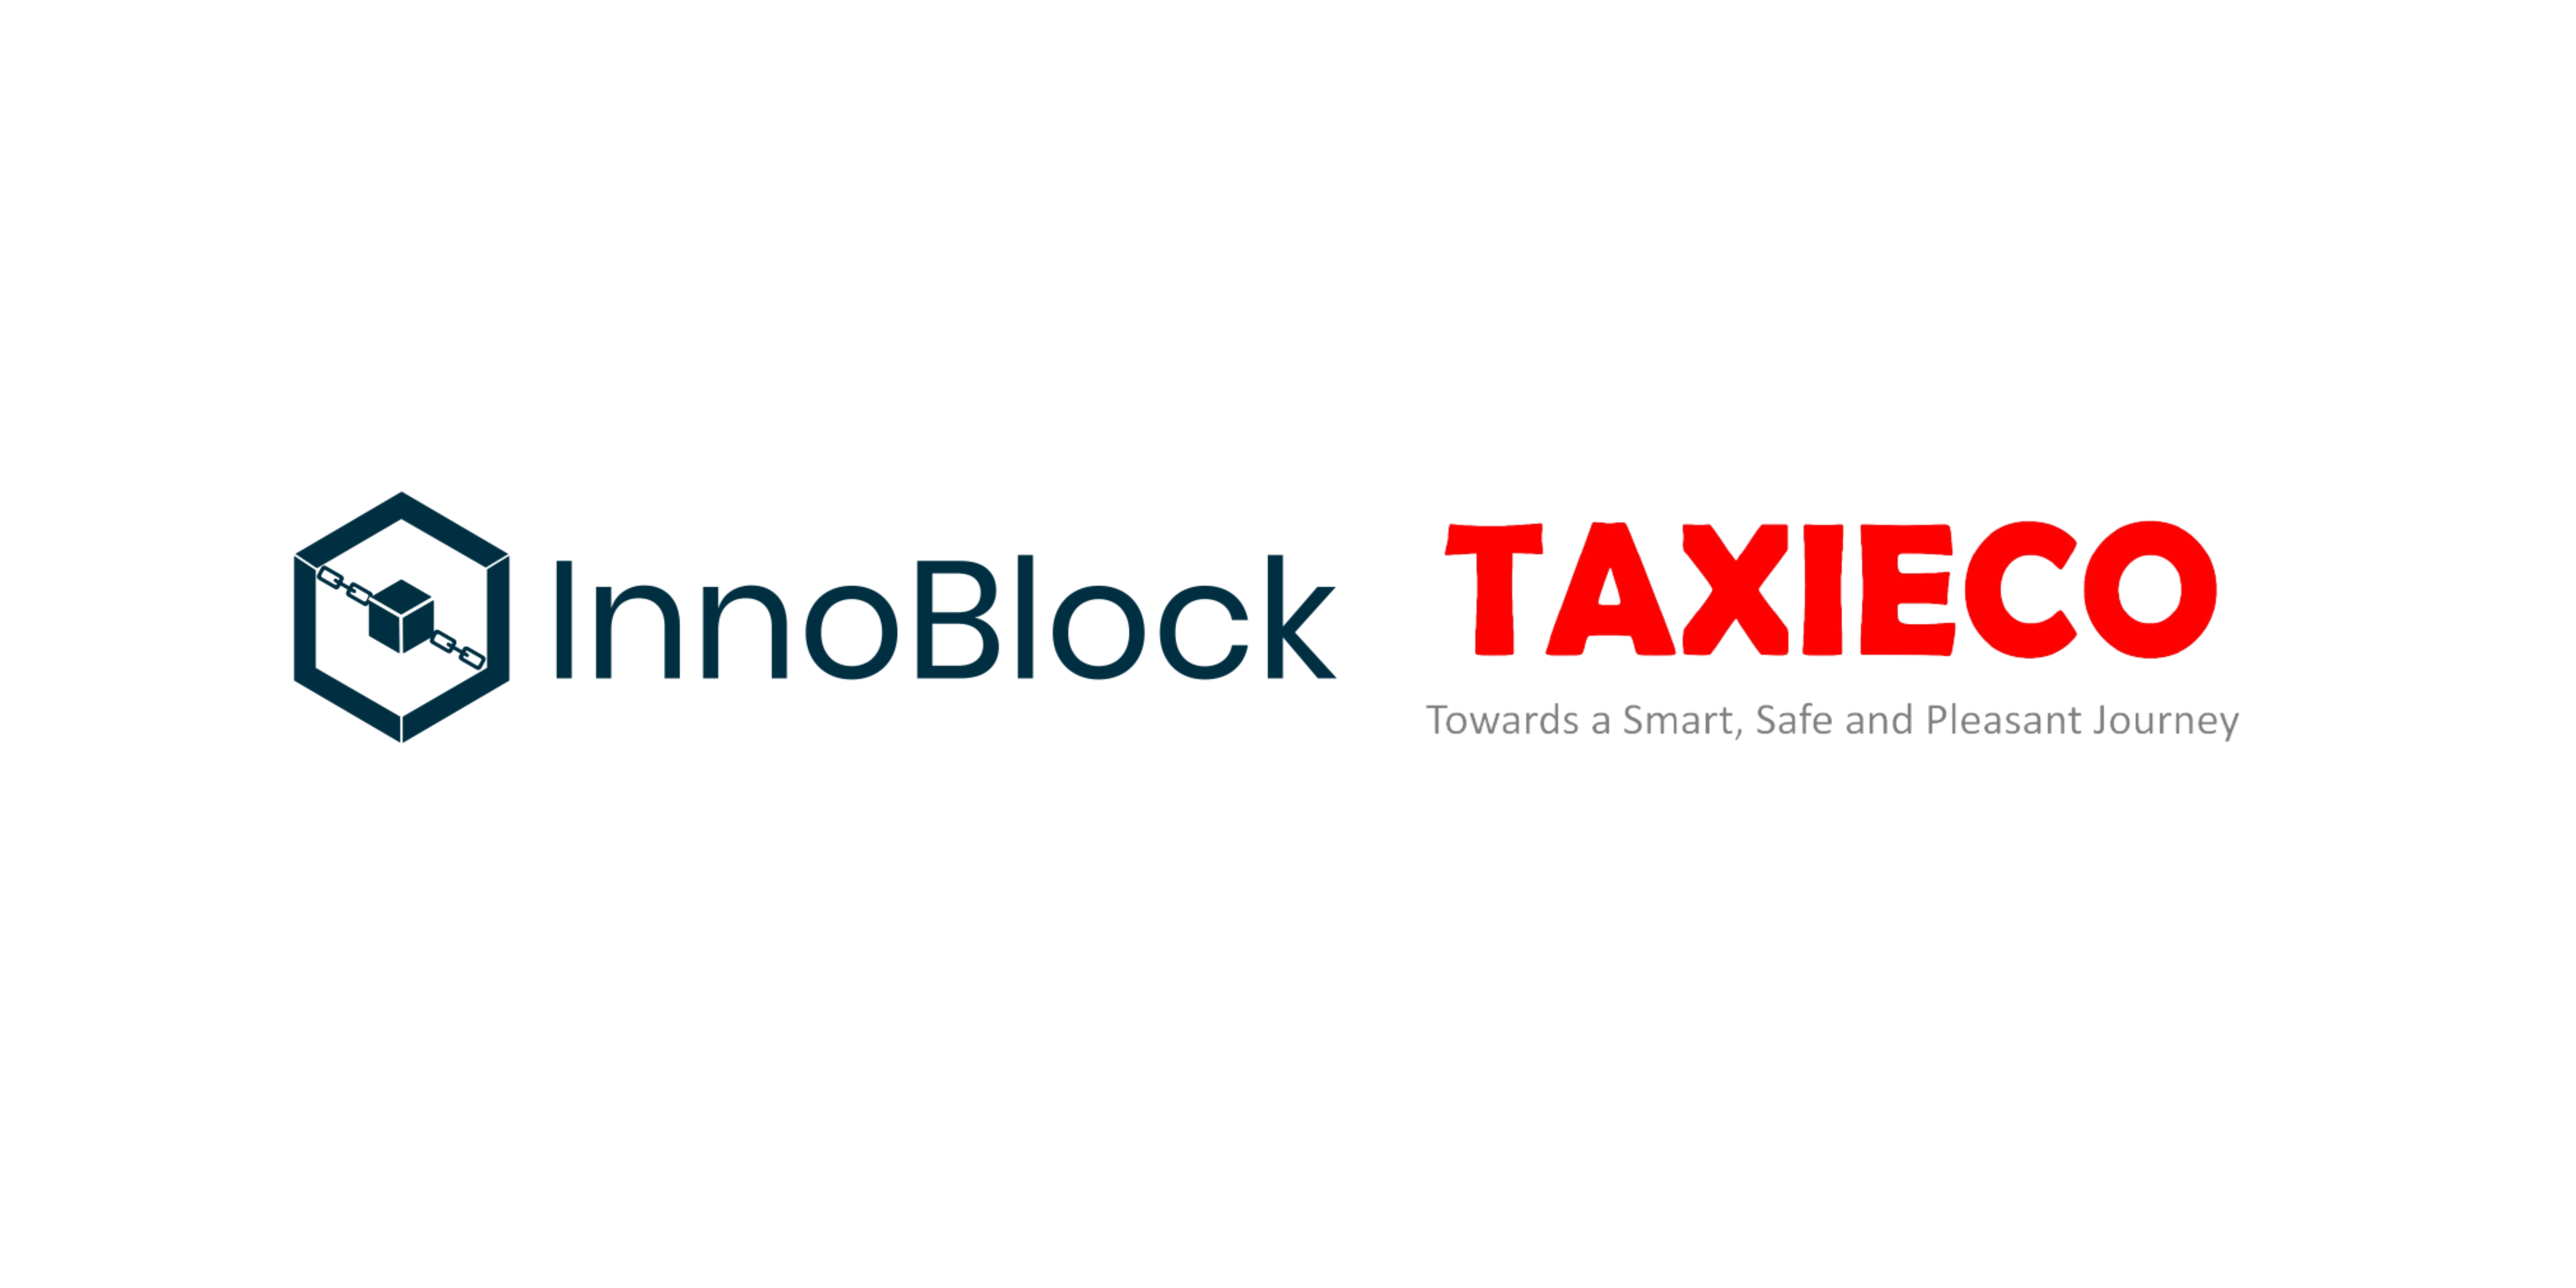 [Green Transportation and Logistics] InnoBlock form strategic partnership with TAXIECO to expedite sustainable transportation development in Hong Kong